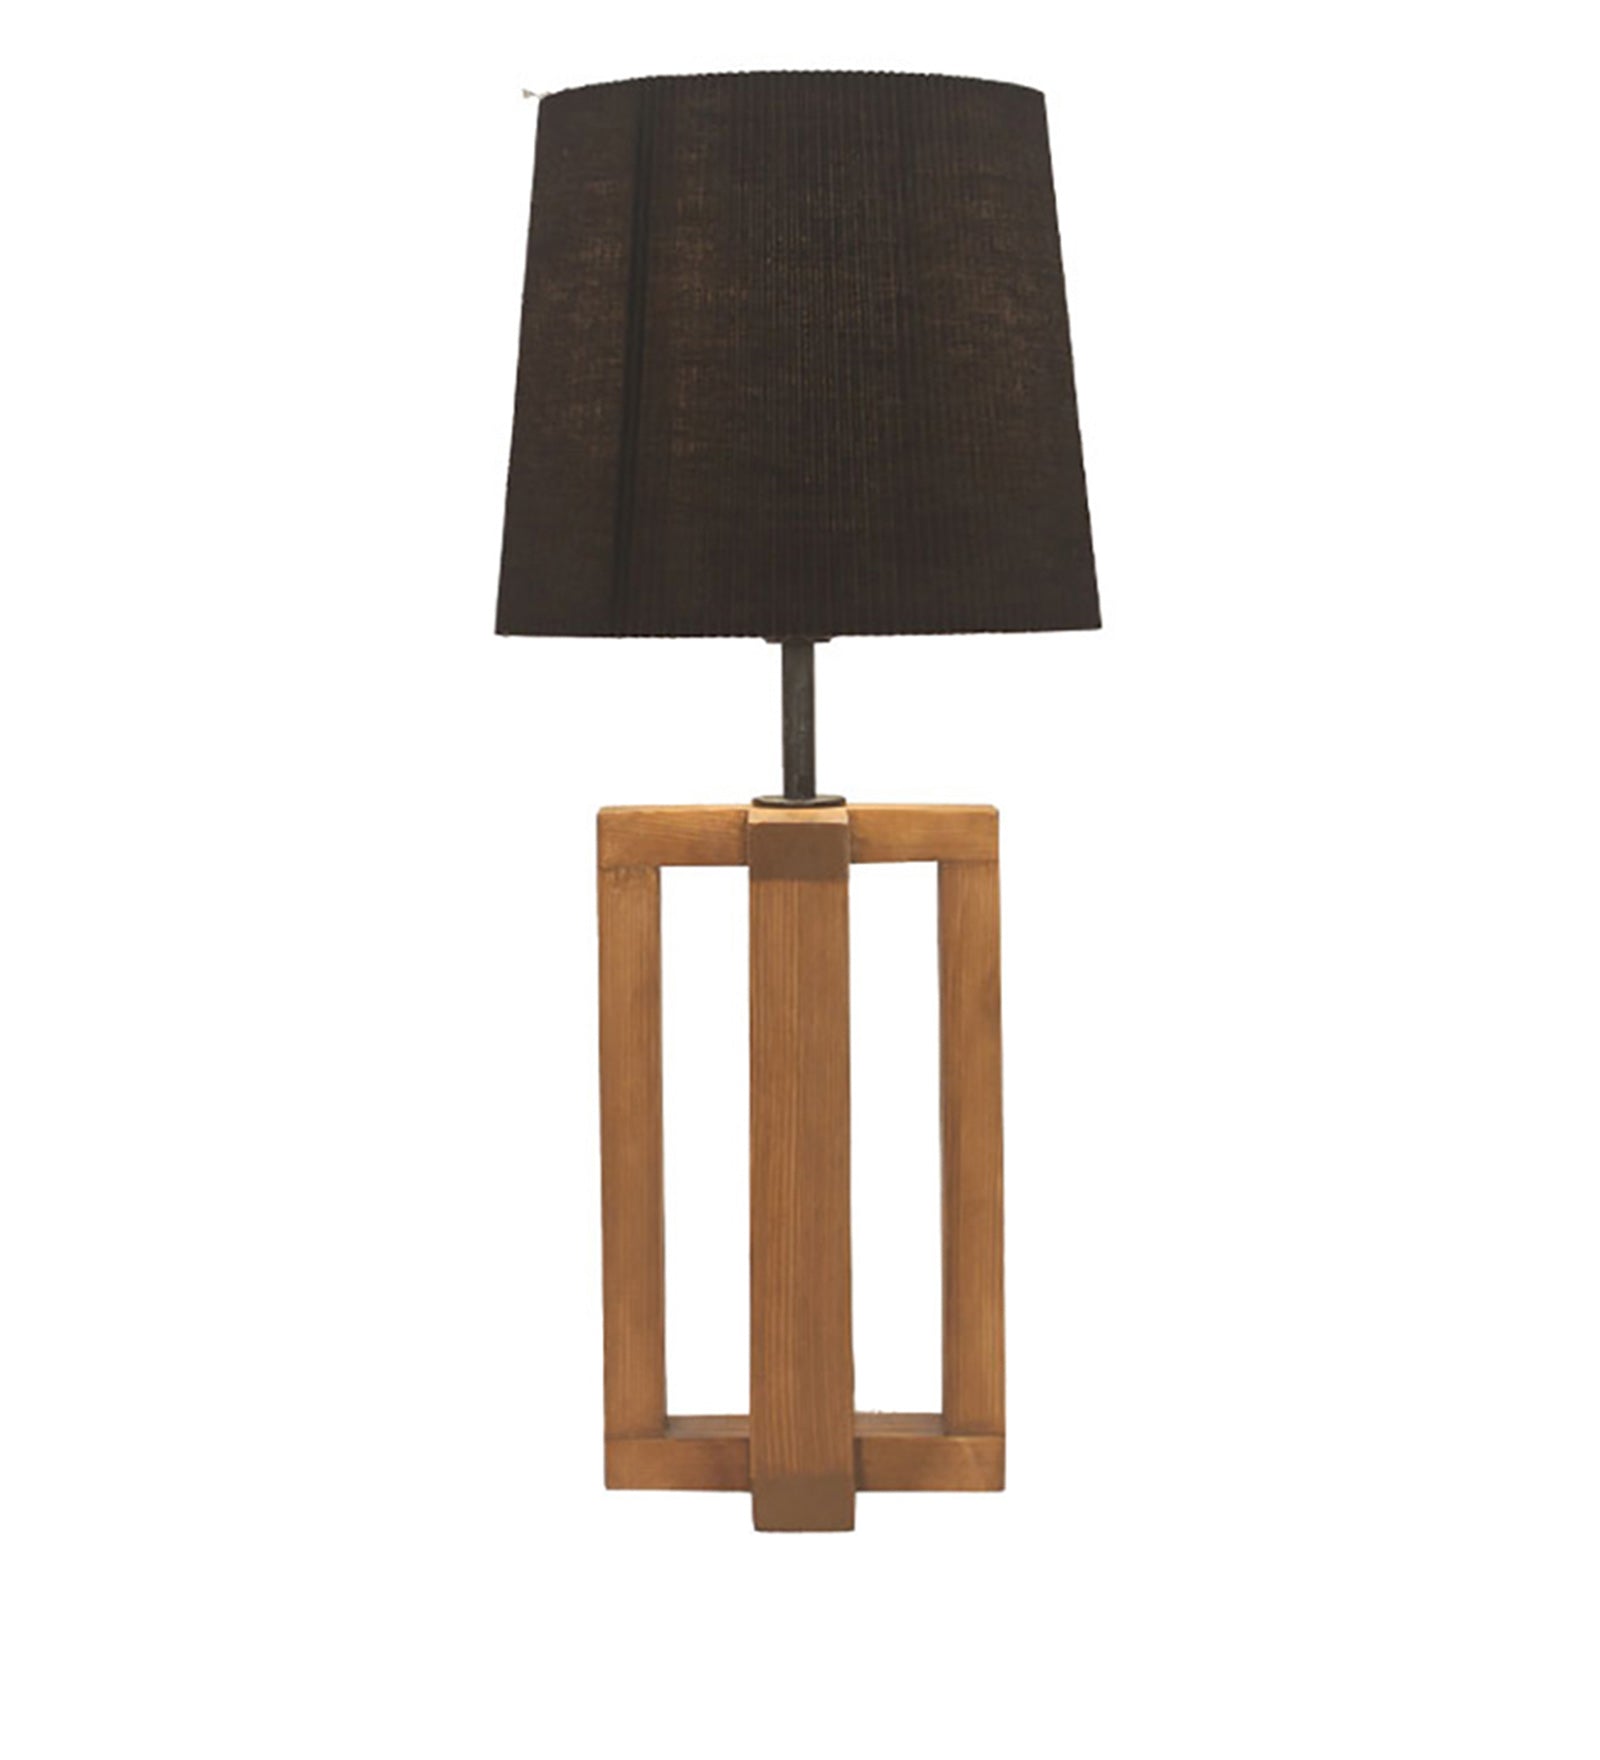 Criss Cross Brown Wooden Table Lamp with Yellow Printed Fabric Lampshade (BULB NOT INCLUDED)